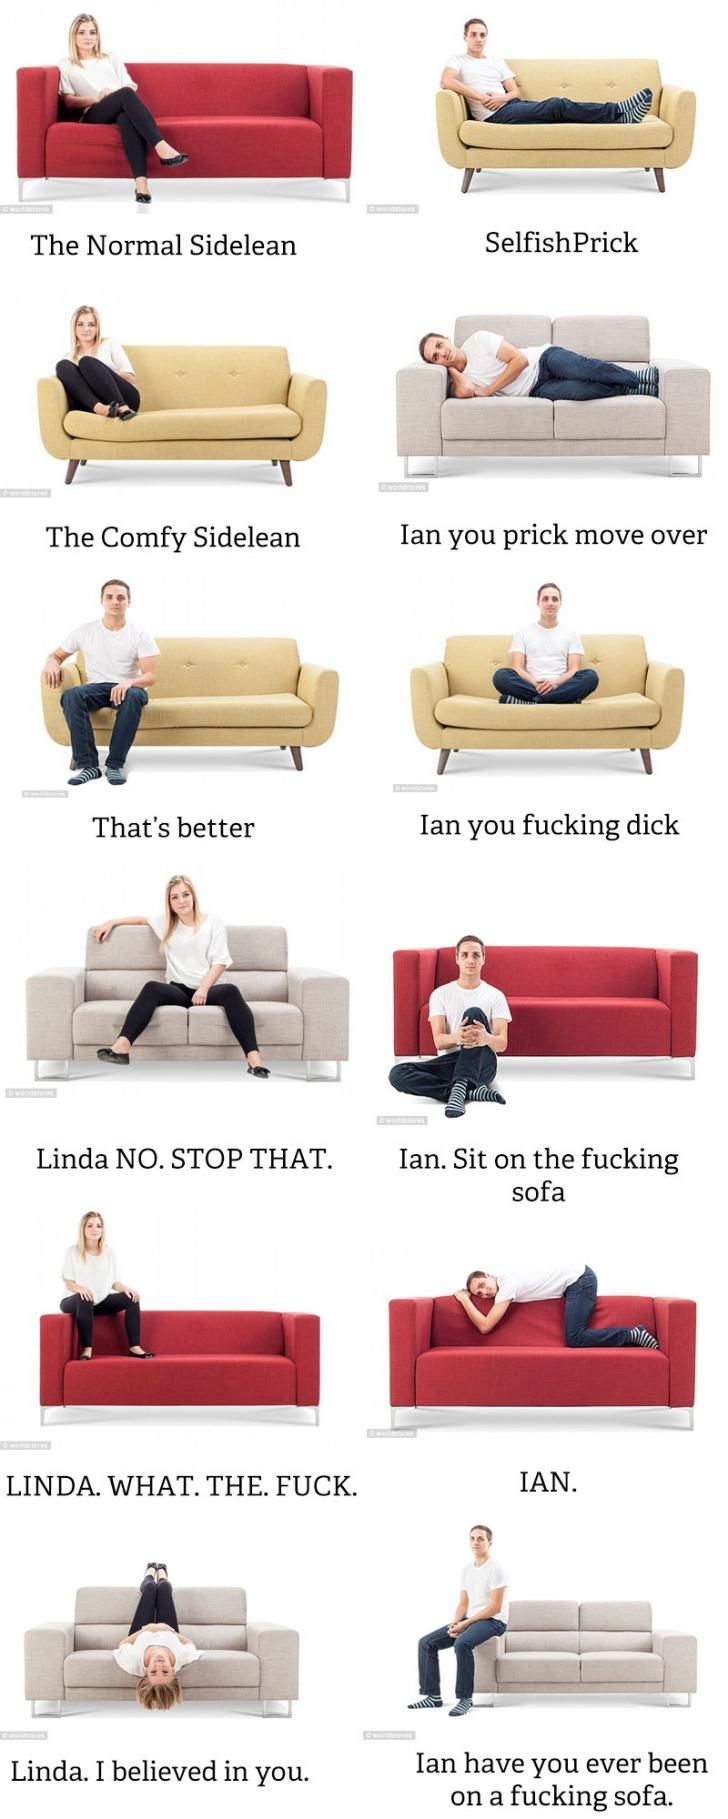 Ian have you ever been on a ***ing sofa?